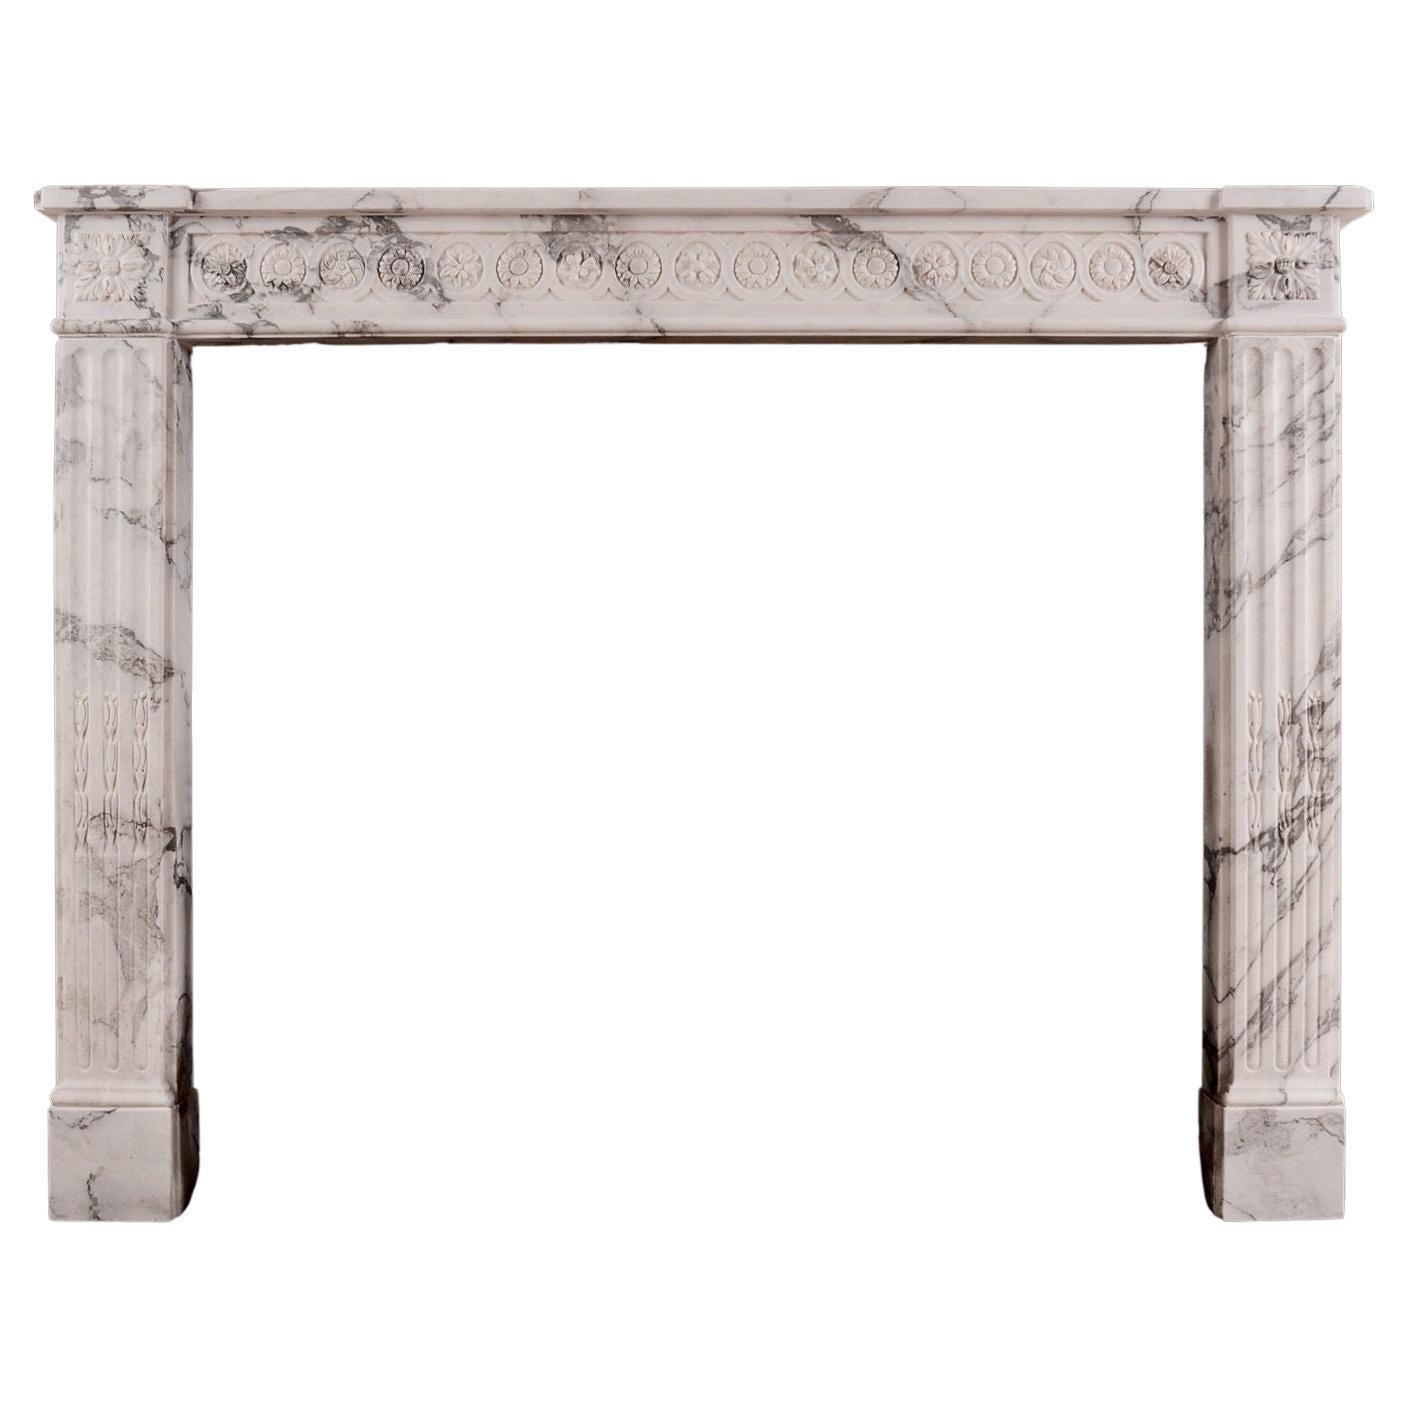 An Italian Arabescato French Louis XVI Marble Fireplace For Sale